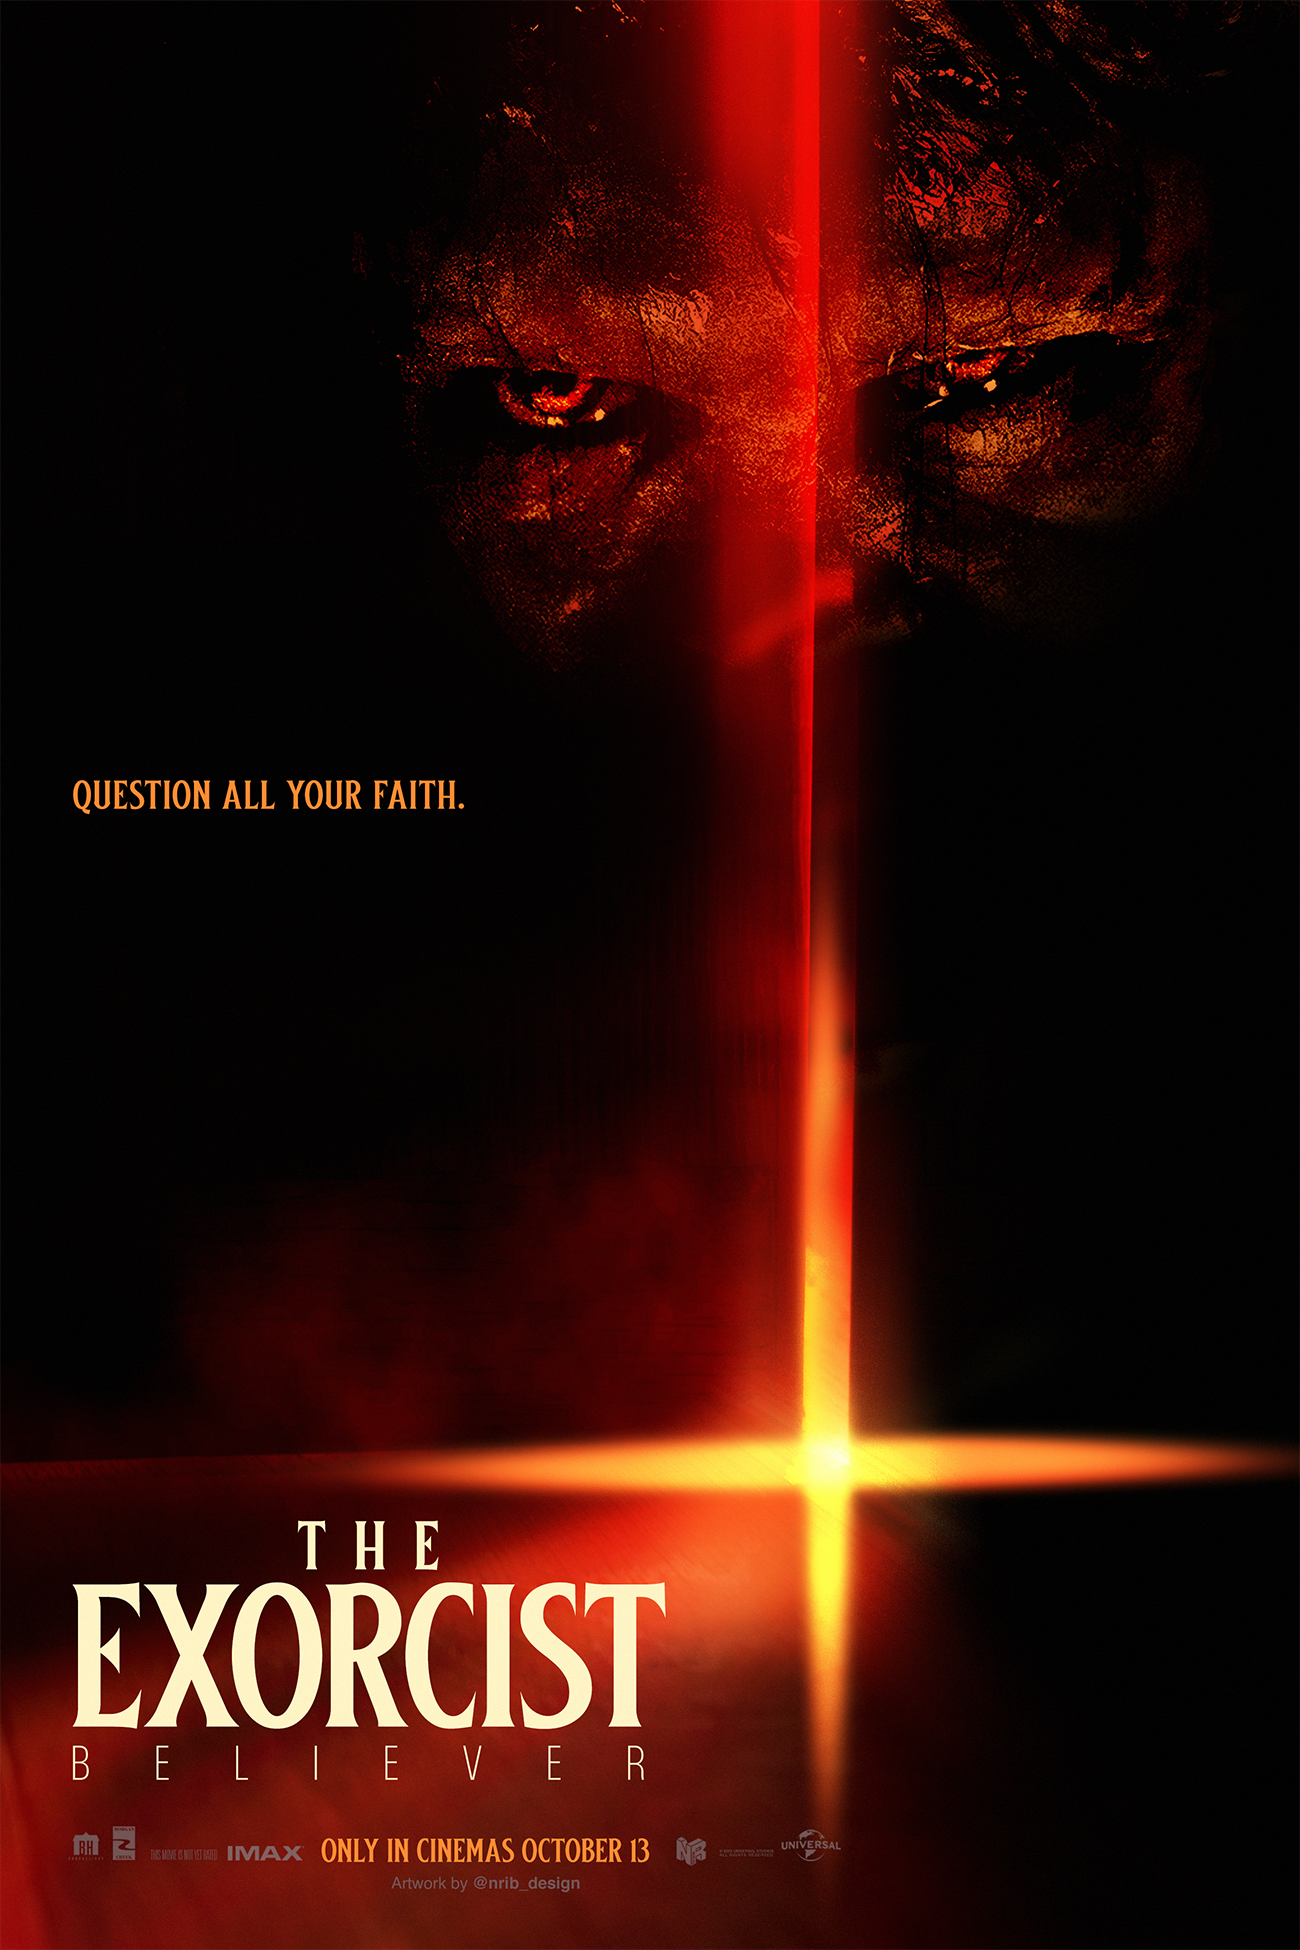 What Is The Exorcist: Believer Rated?